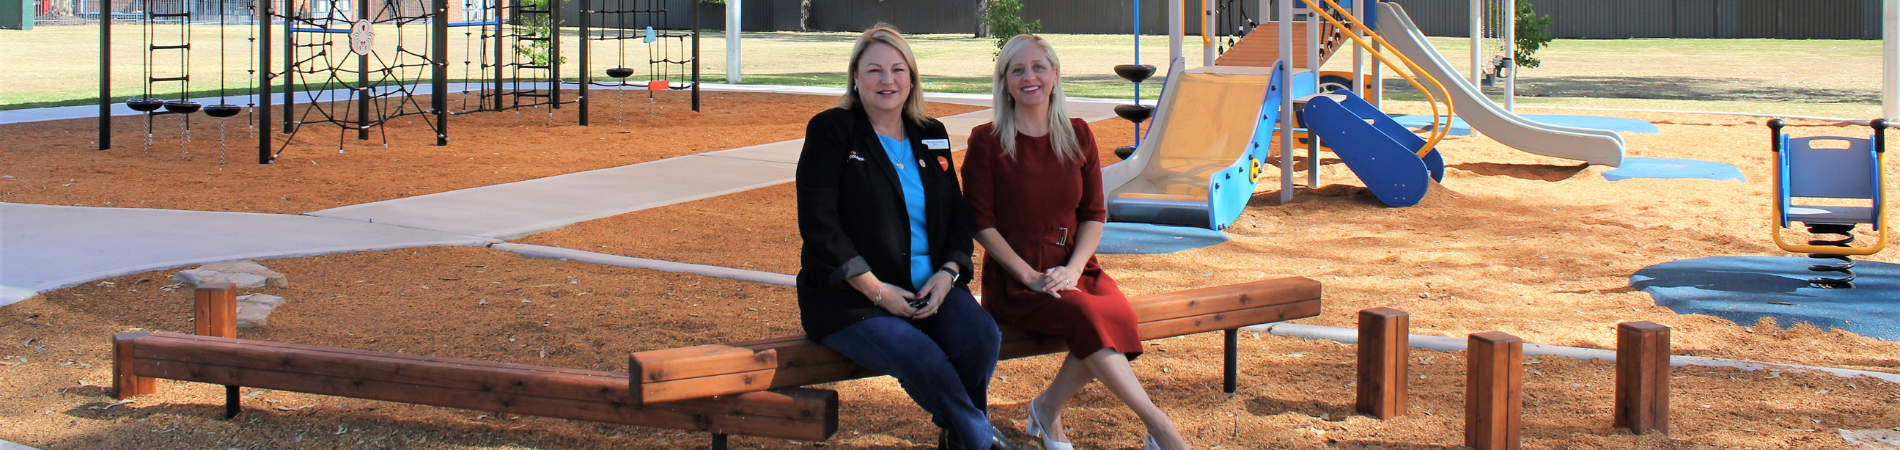 Penrith Mayor Tricia Hitchen and Federal Member for Lindsay Melissa McIntosh at Armstein Crescent Reserve in Werrington.